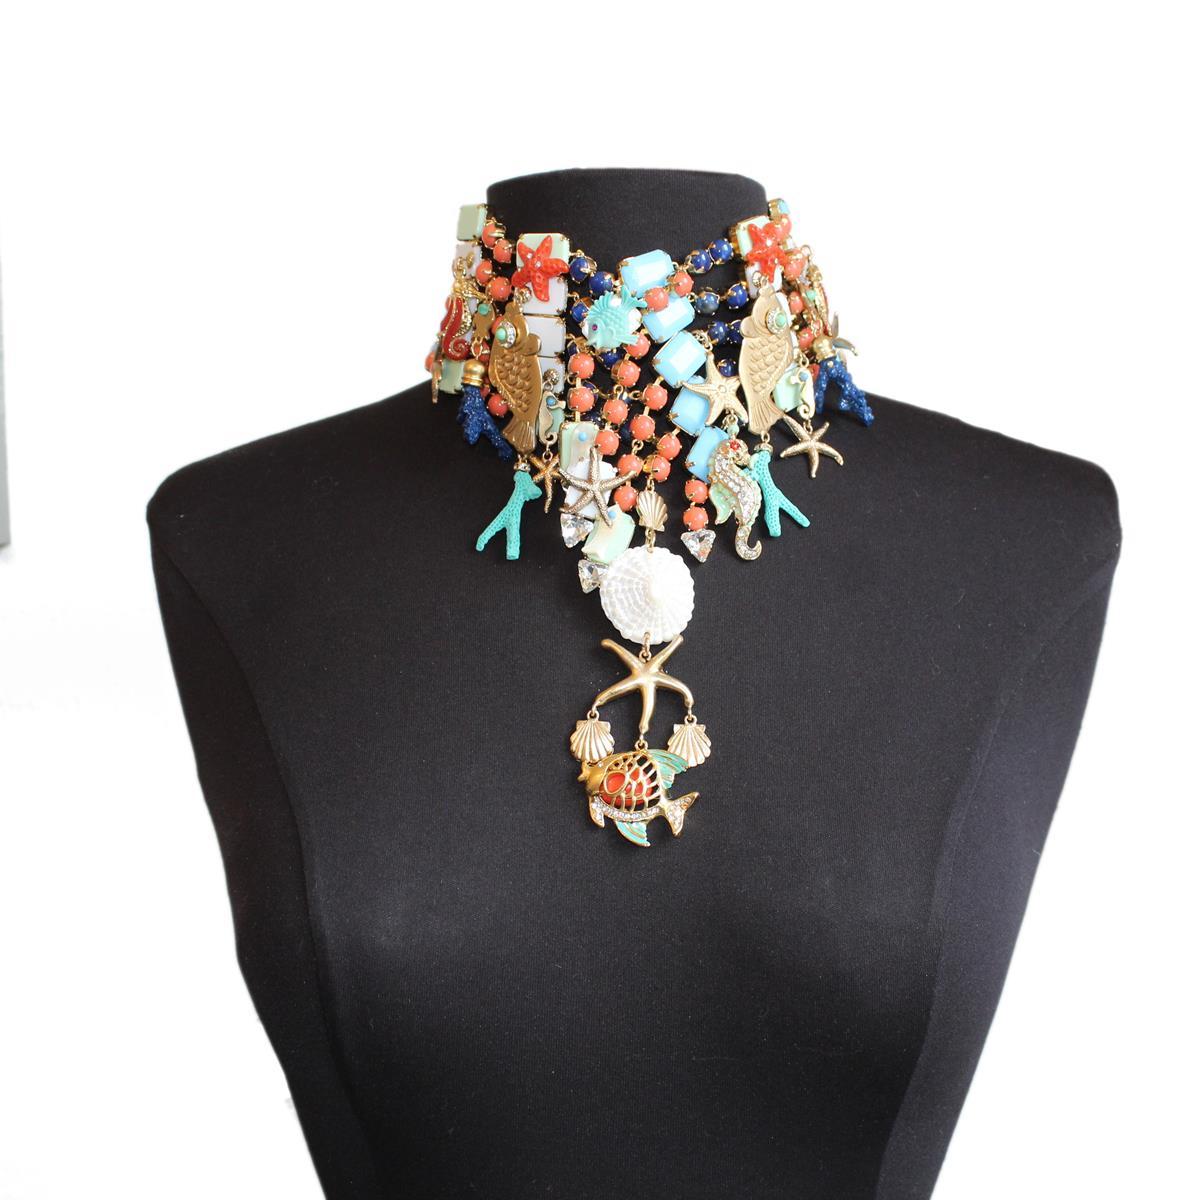 Stunning fancy piece by Carlo Zini Milano
New summer 2019 colection !
Non allergenic rhodium
Opaque Gold dipped
Sea theme
Amazing creation of swarovski crystals, rhinestones and resins
100% Artisanal work
Made in Milano
Worldwide express shipping